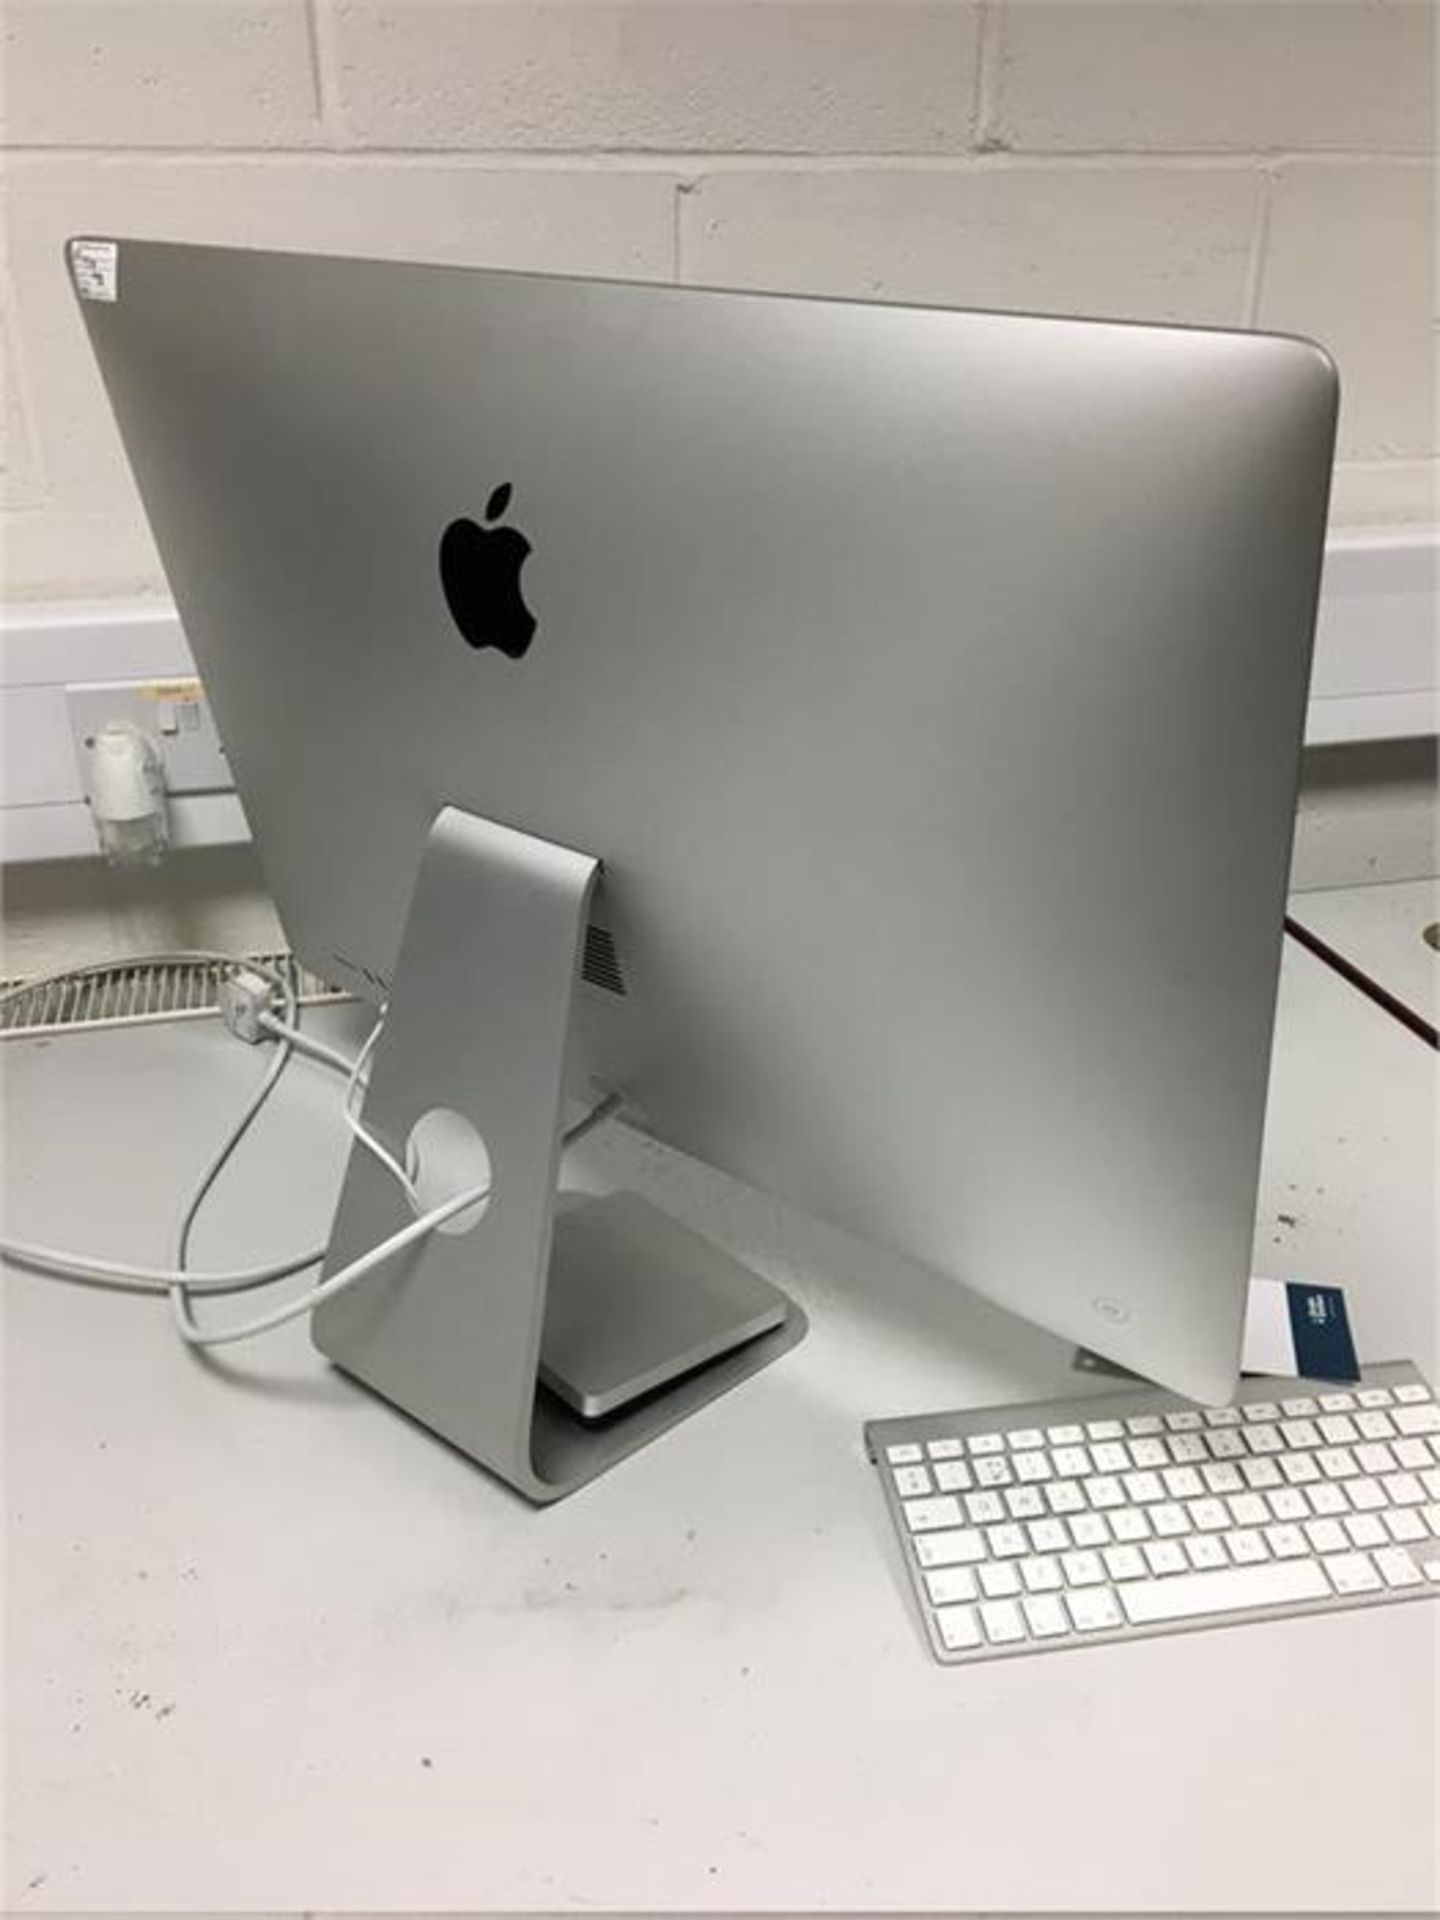 Apple 27" iMac, Model: A1419 complete with CD drive, wireless mouse and keyboard - Image 2 of 3